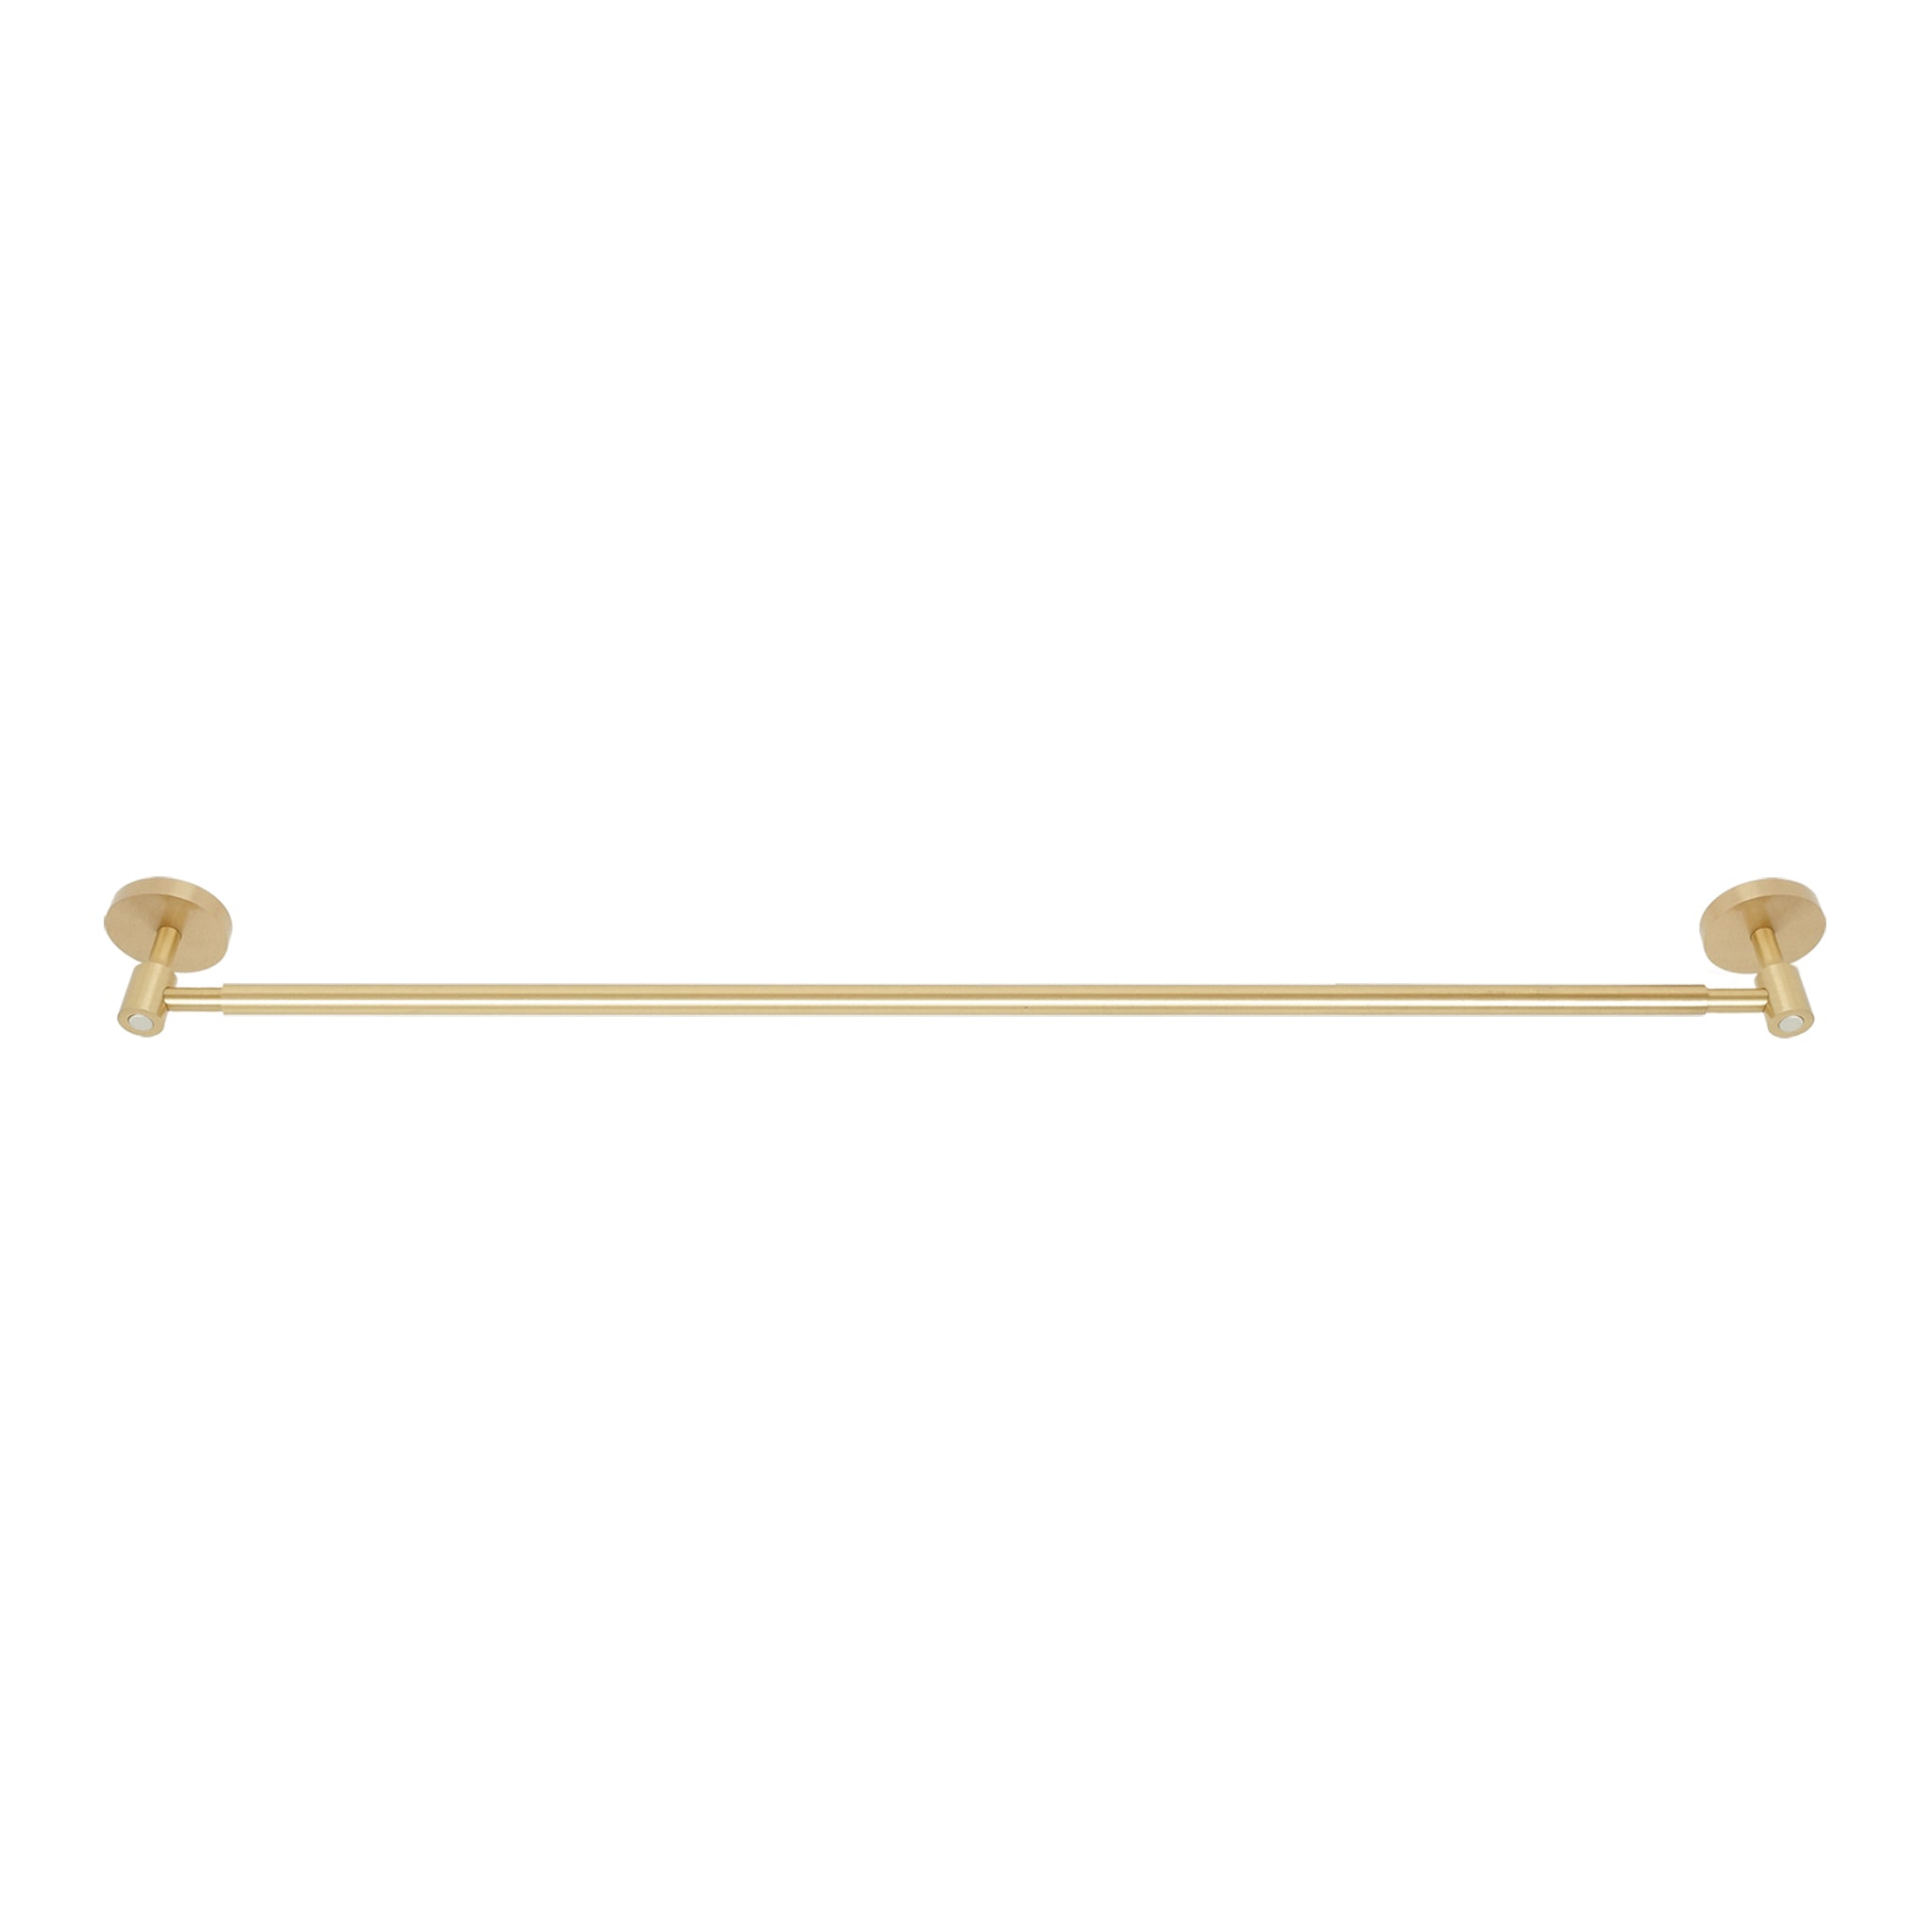 Brass and bone color Head towel bar 24" Dutton Brown hardware